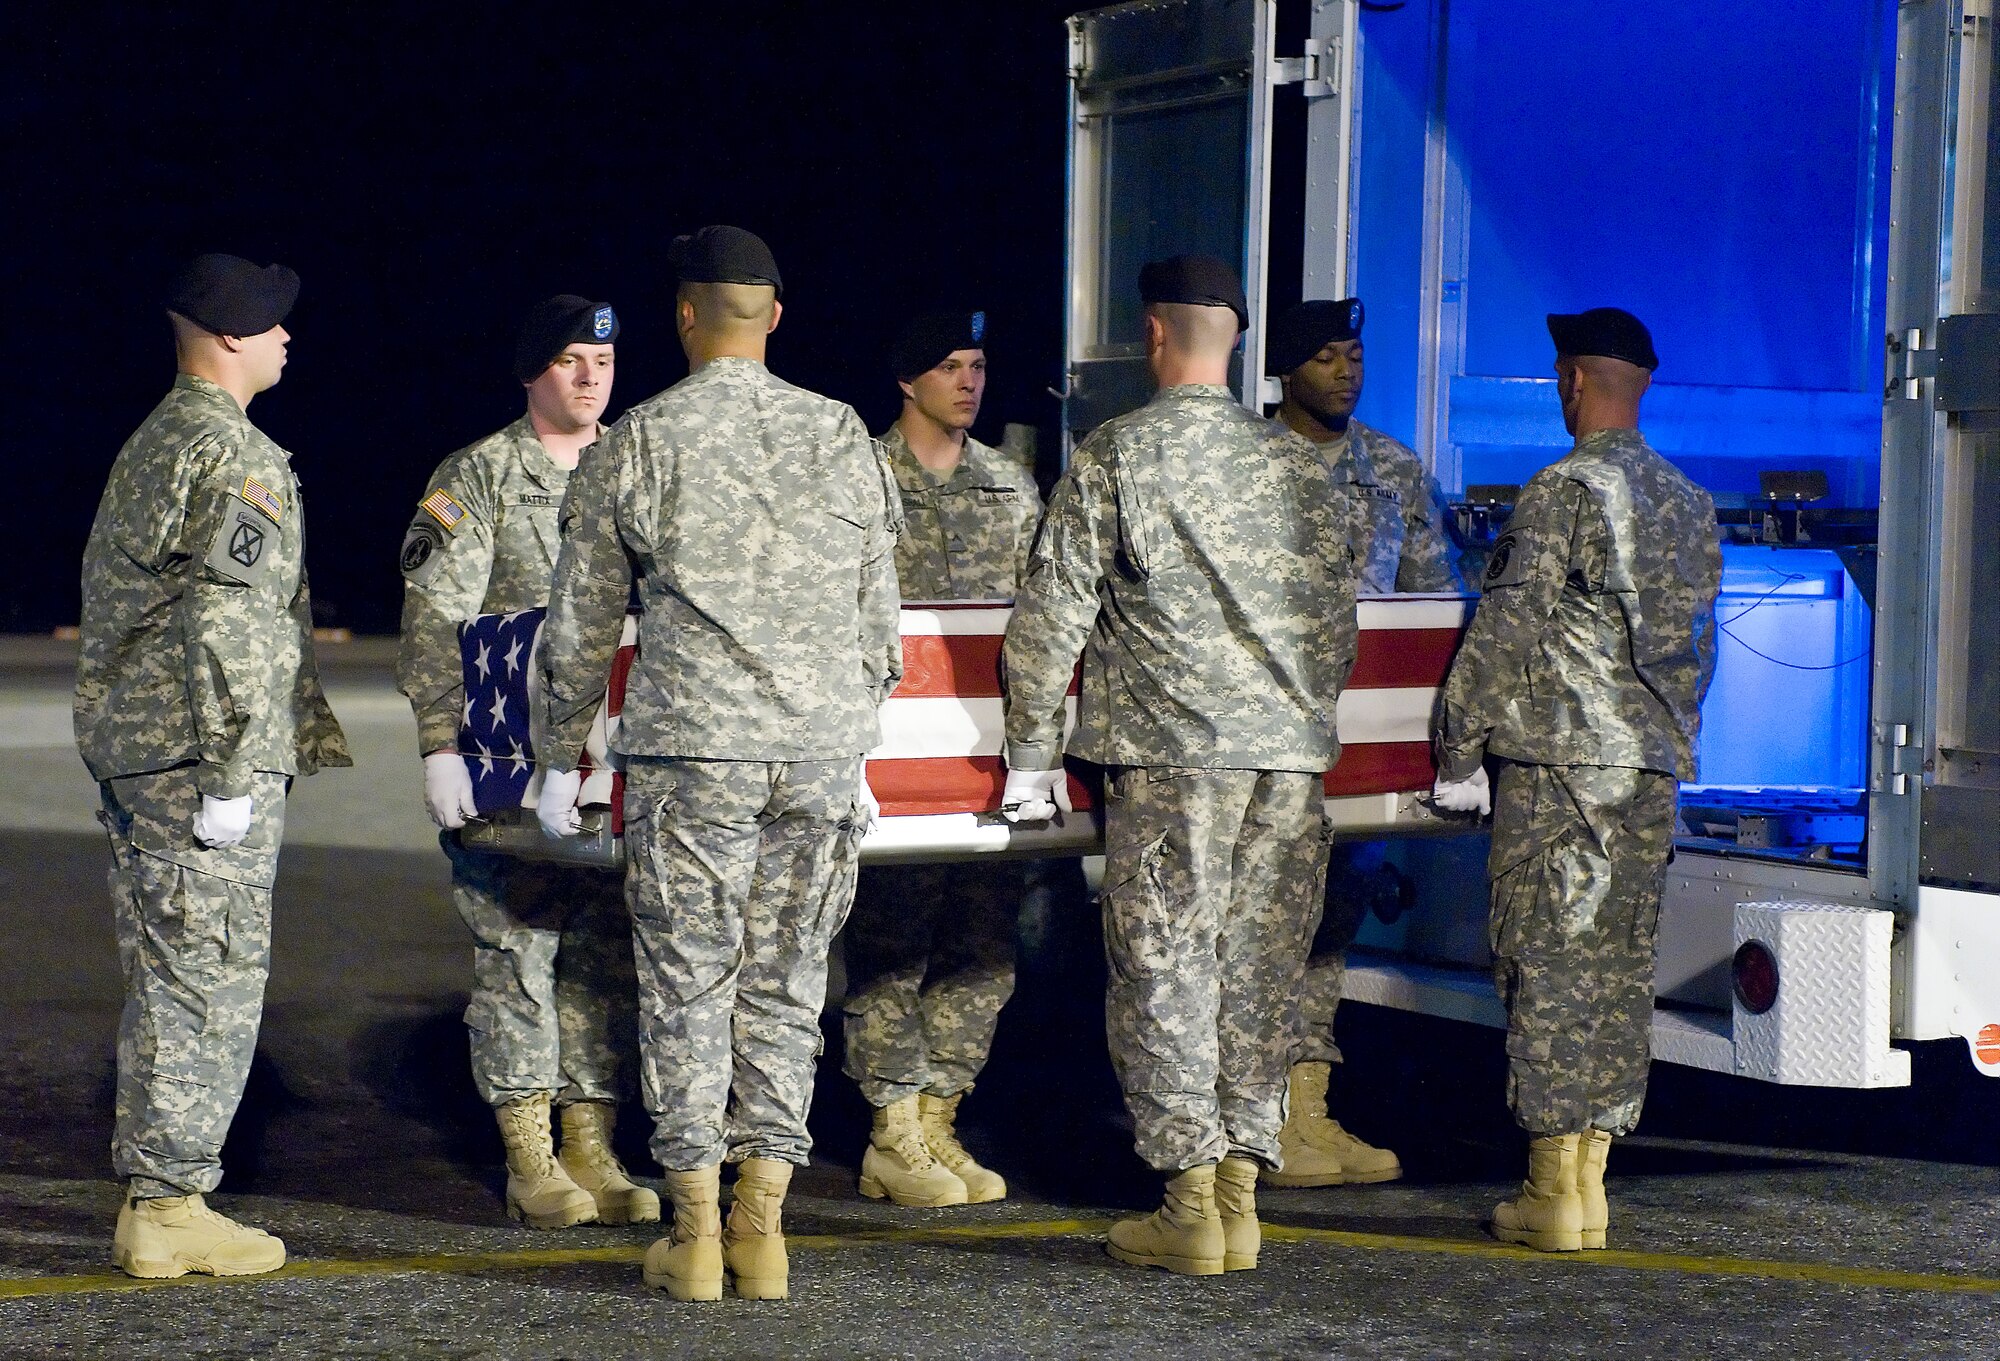 An Army carry team transfers the remains of Army Spc. Israel Candelaria Mejias, of San Lorenzo, Puerto Rico, at Dover Air Force Base, Del., April 7. Specialist Candelaria Mejias died April 5 near Baghdad, Iraq, of wounds sustained when a mine detonated near him during combat operations. He was assigned to the 1st Battalion, 2nd Infantry Regiment in Task Force 3rd Battalion, 66th Armor Regiment, 172nd Brigade Combat Team, Grafenwoehr, Germany. (U.S. Air Force photo/Roland Balik)